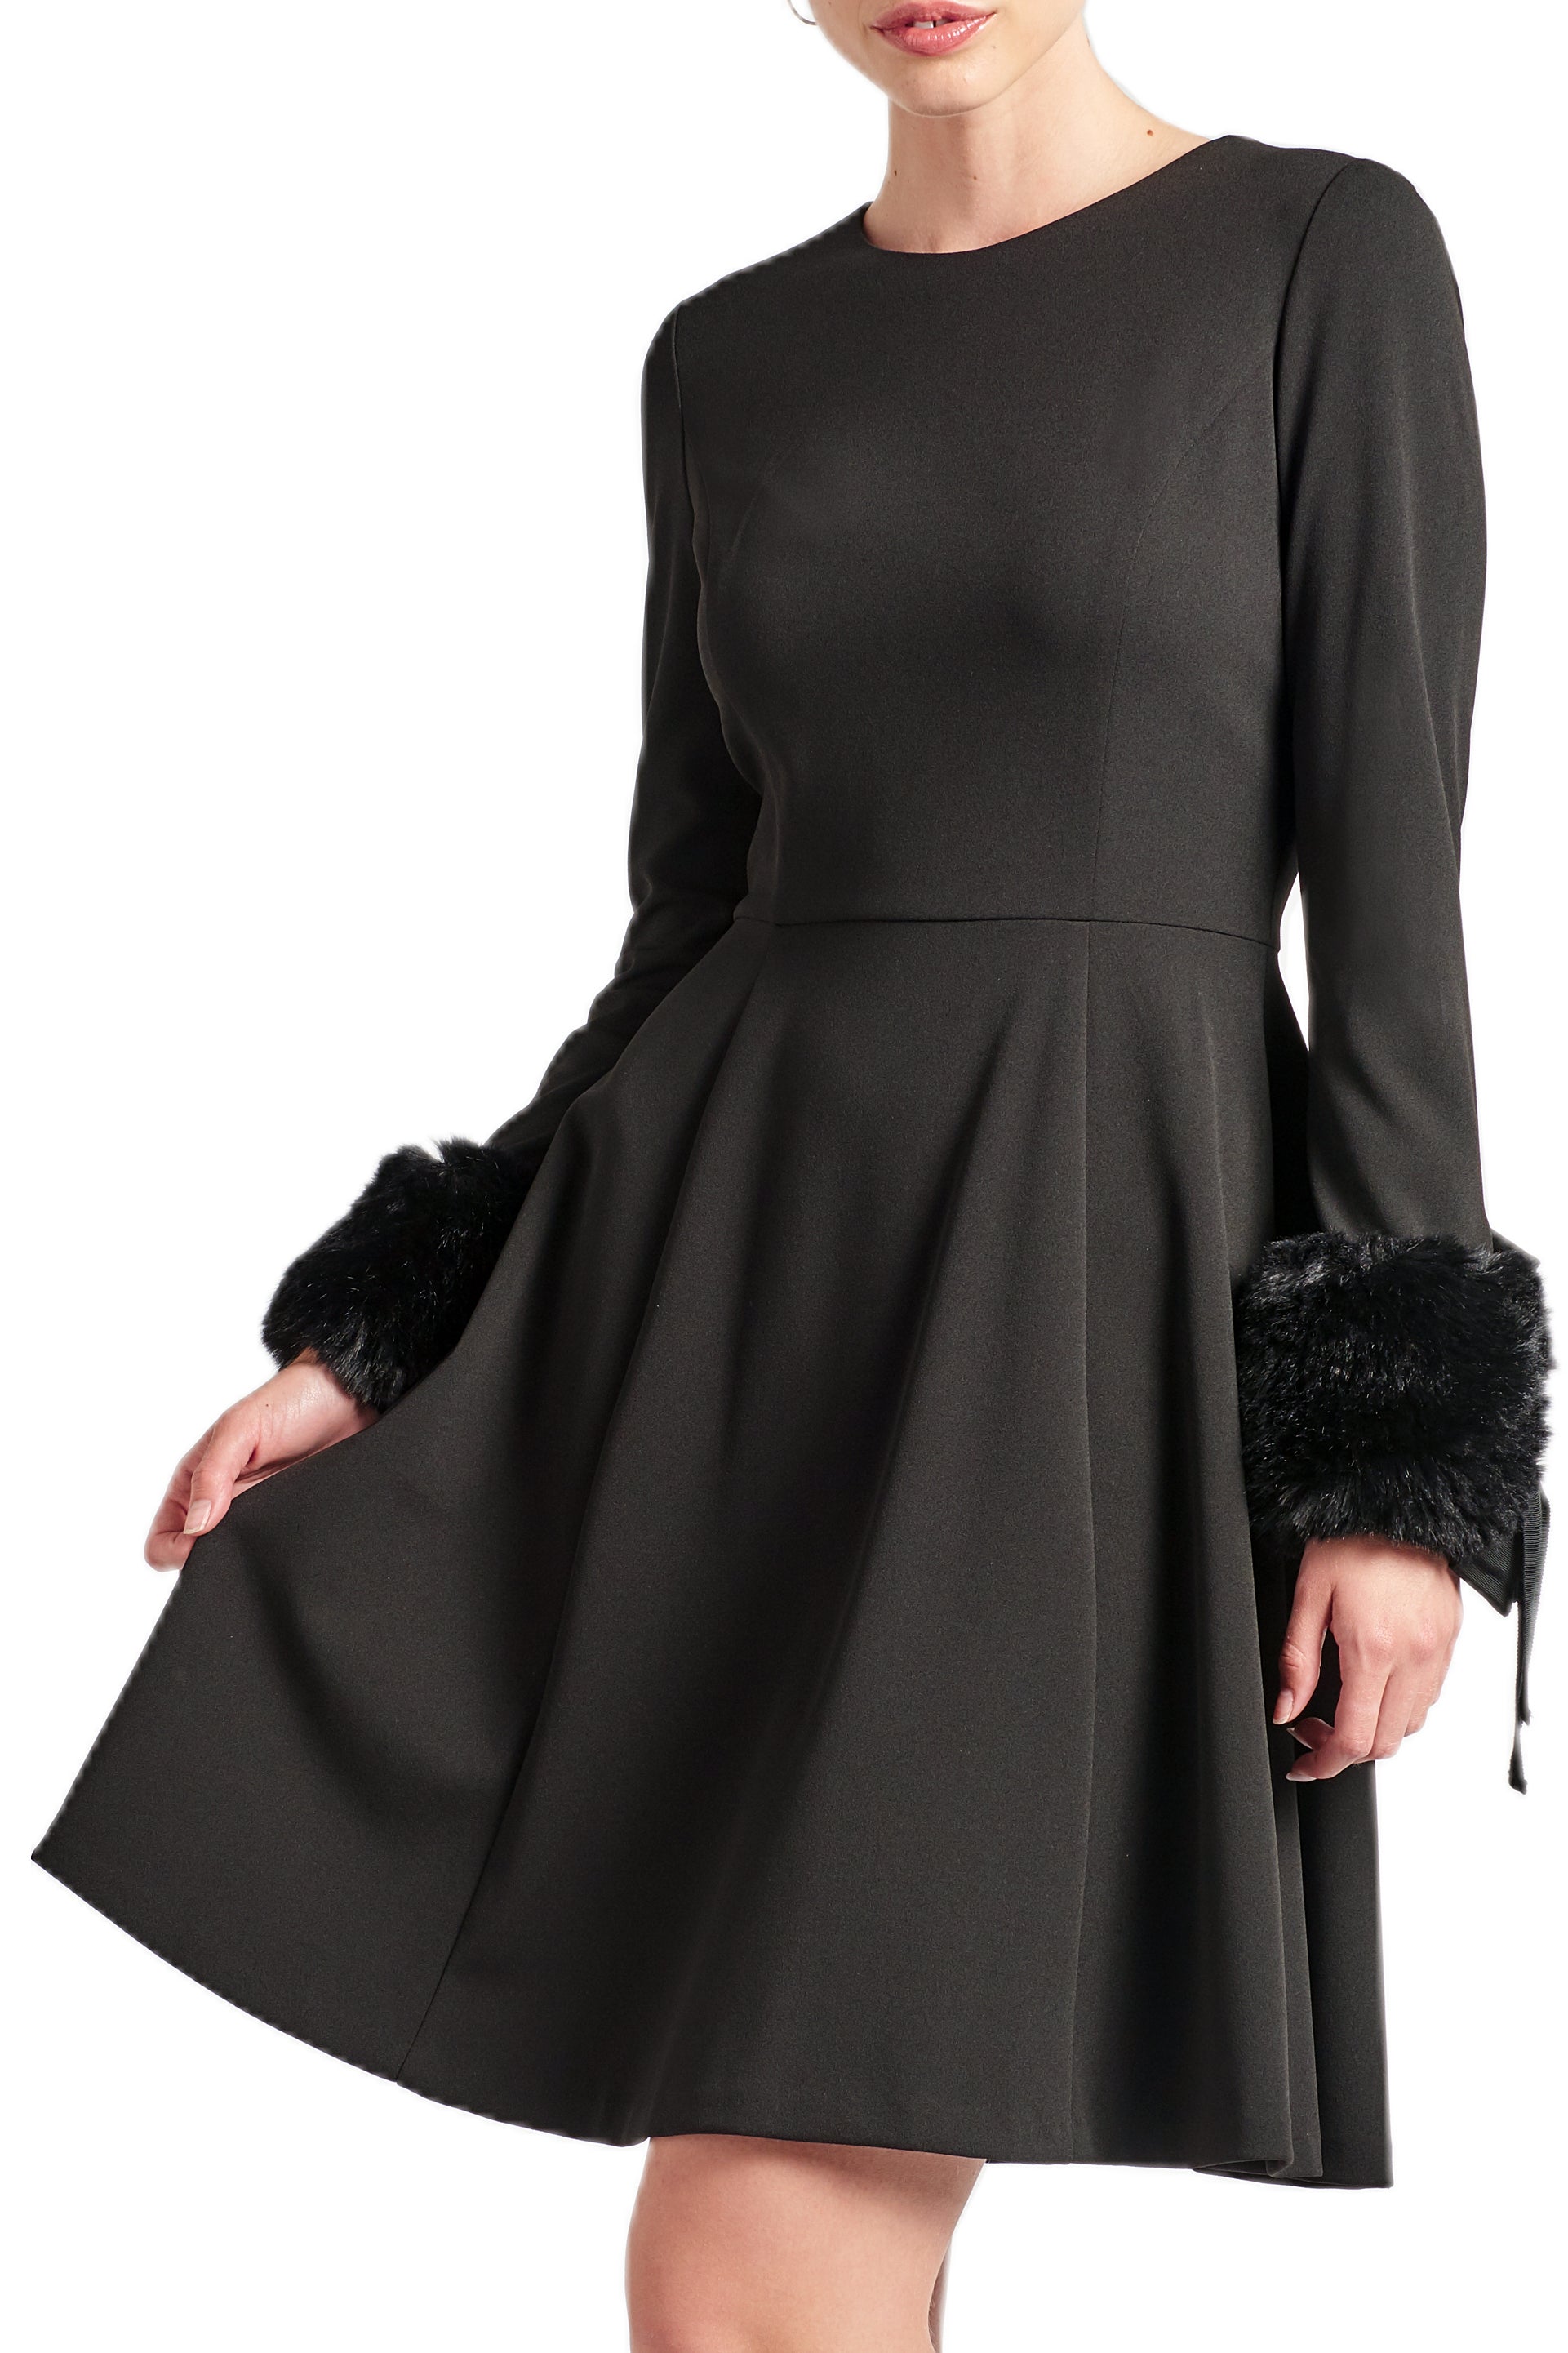 Model wearing fit & flare black poly crepe long sleeve dress with sweetheart neckline & faux fur cuffs.